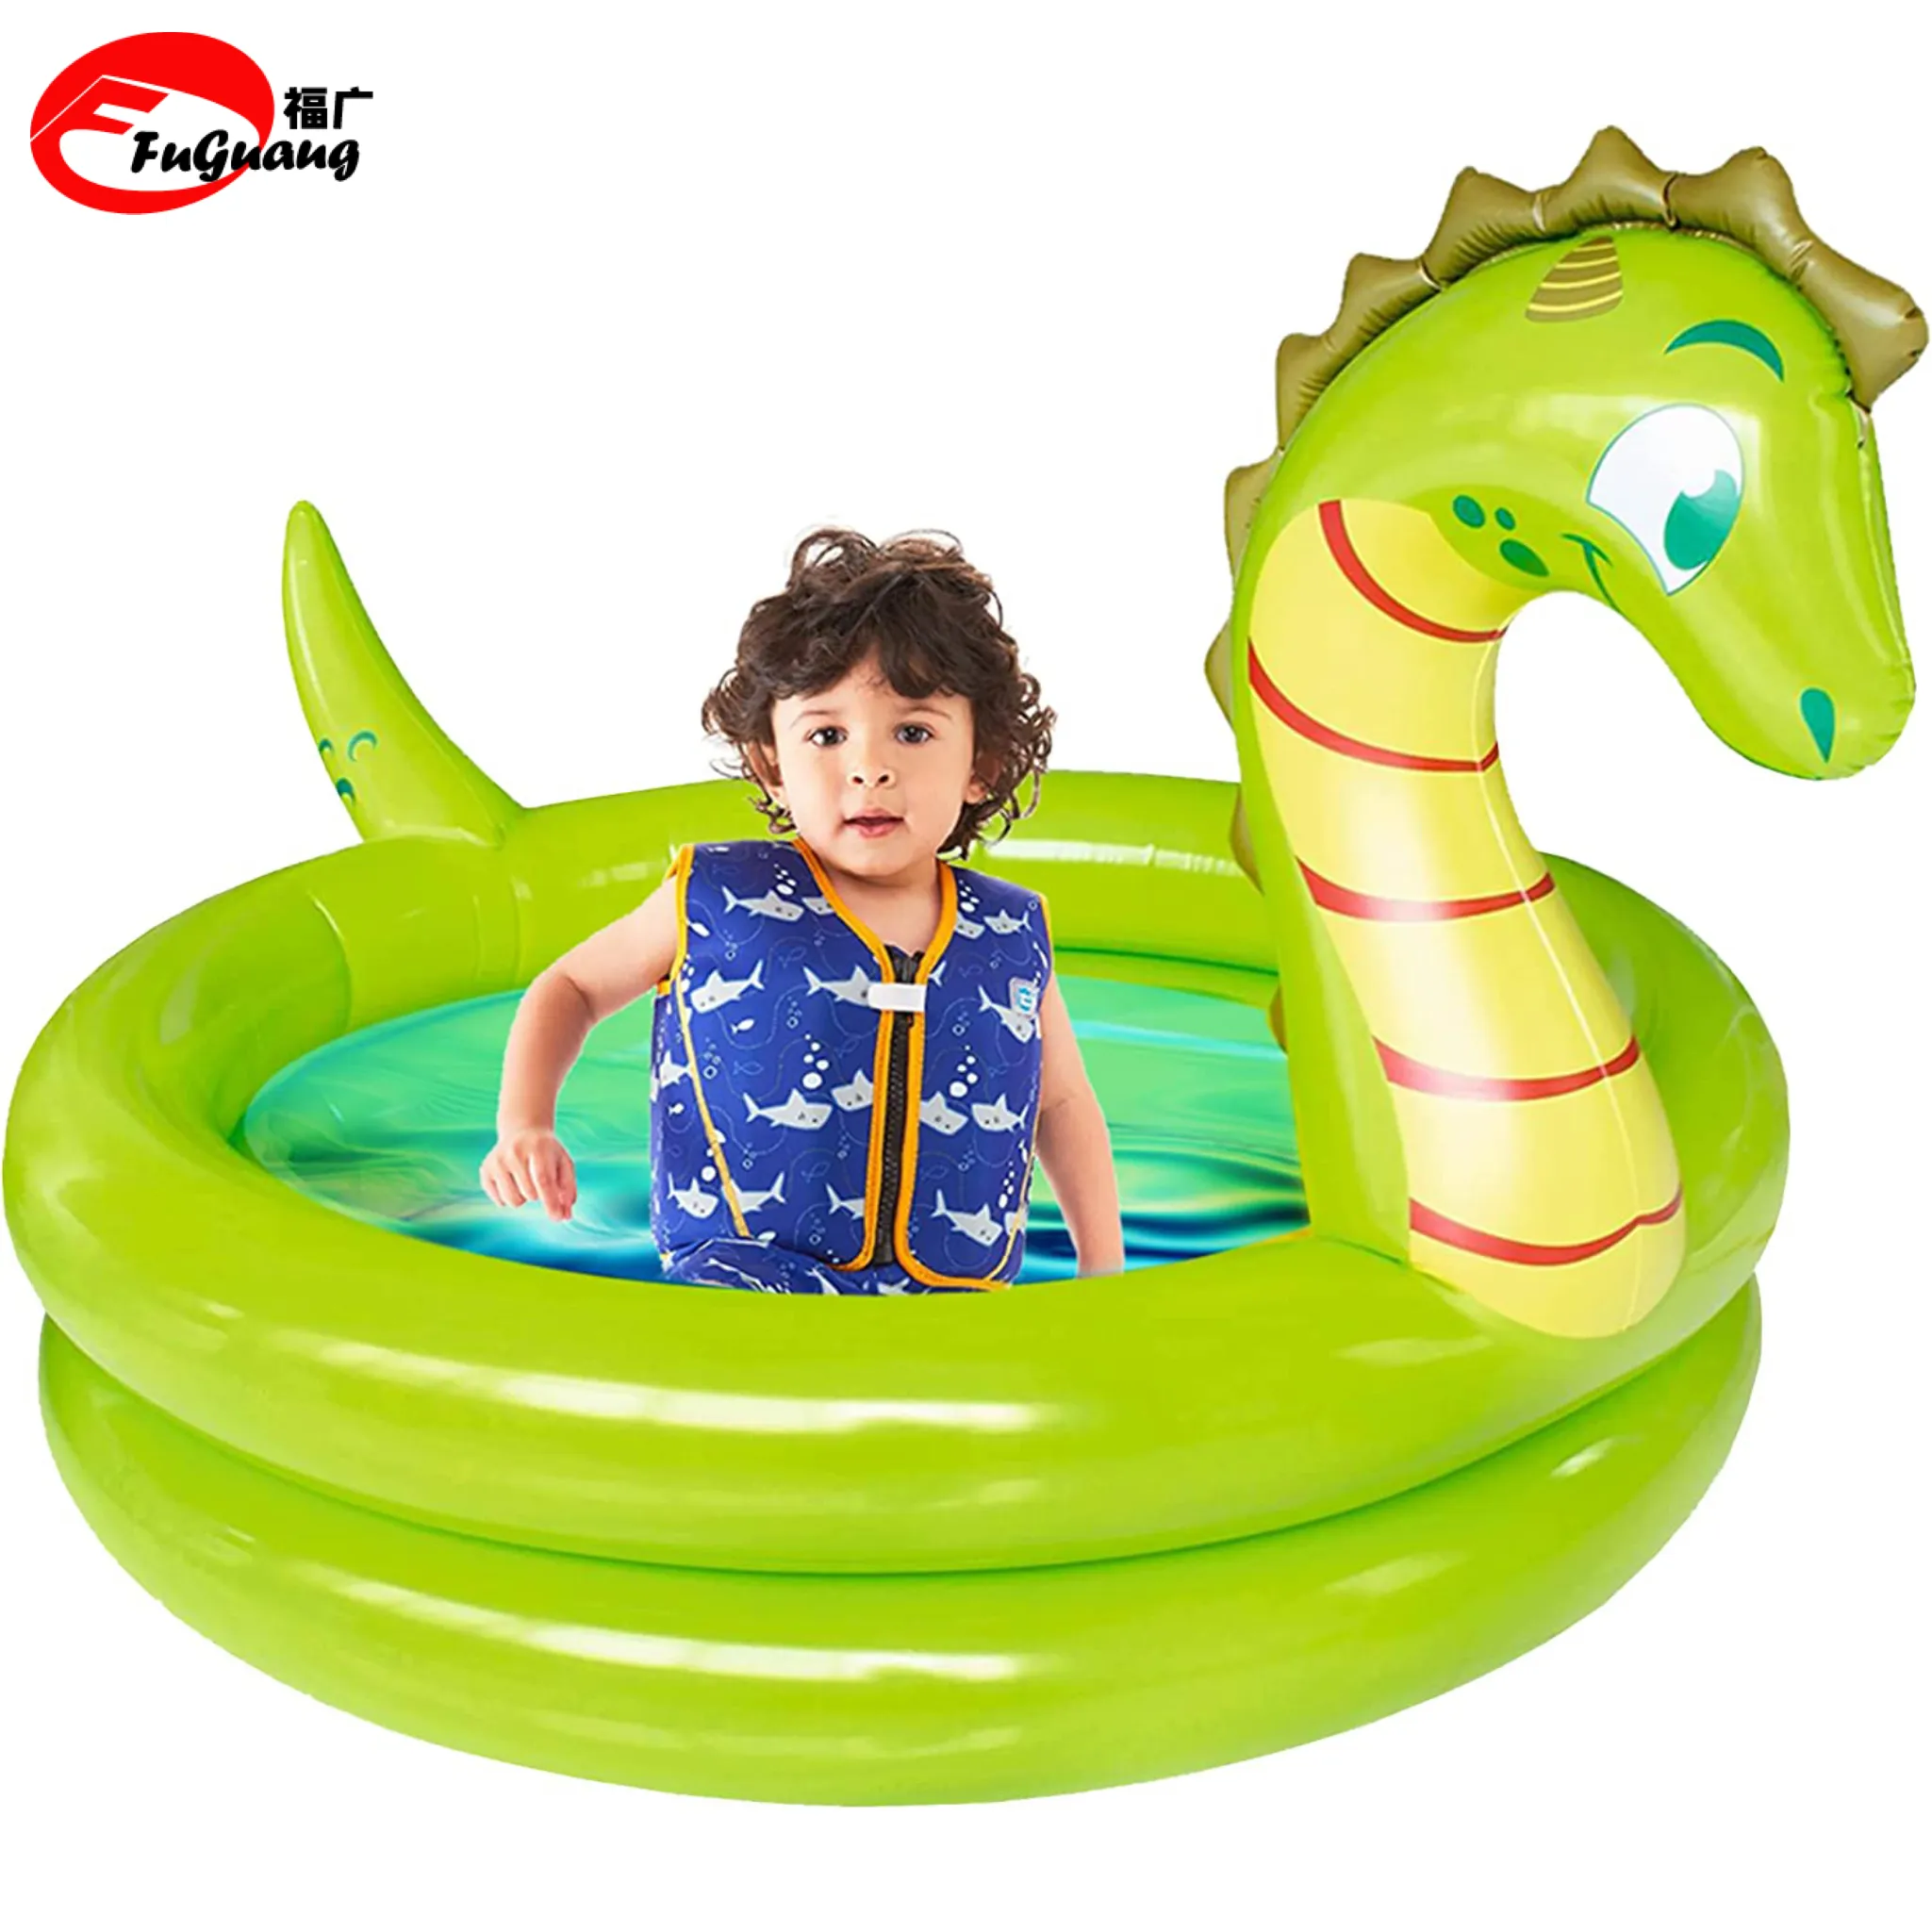 Summer children's double-ring dinosaur inflatable pool outdoor indoor water games suitable for young children